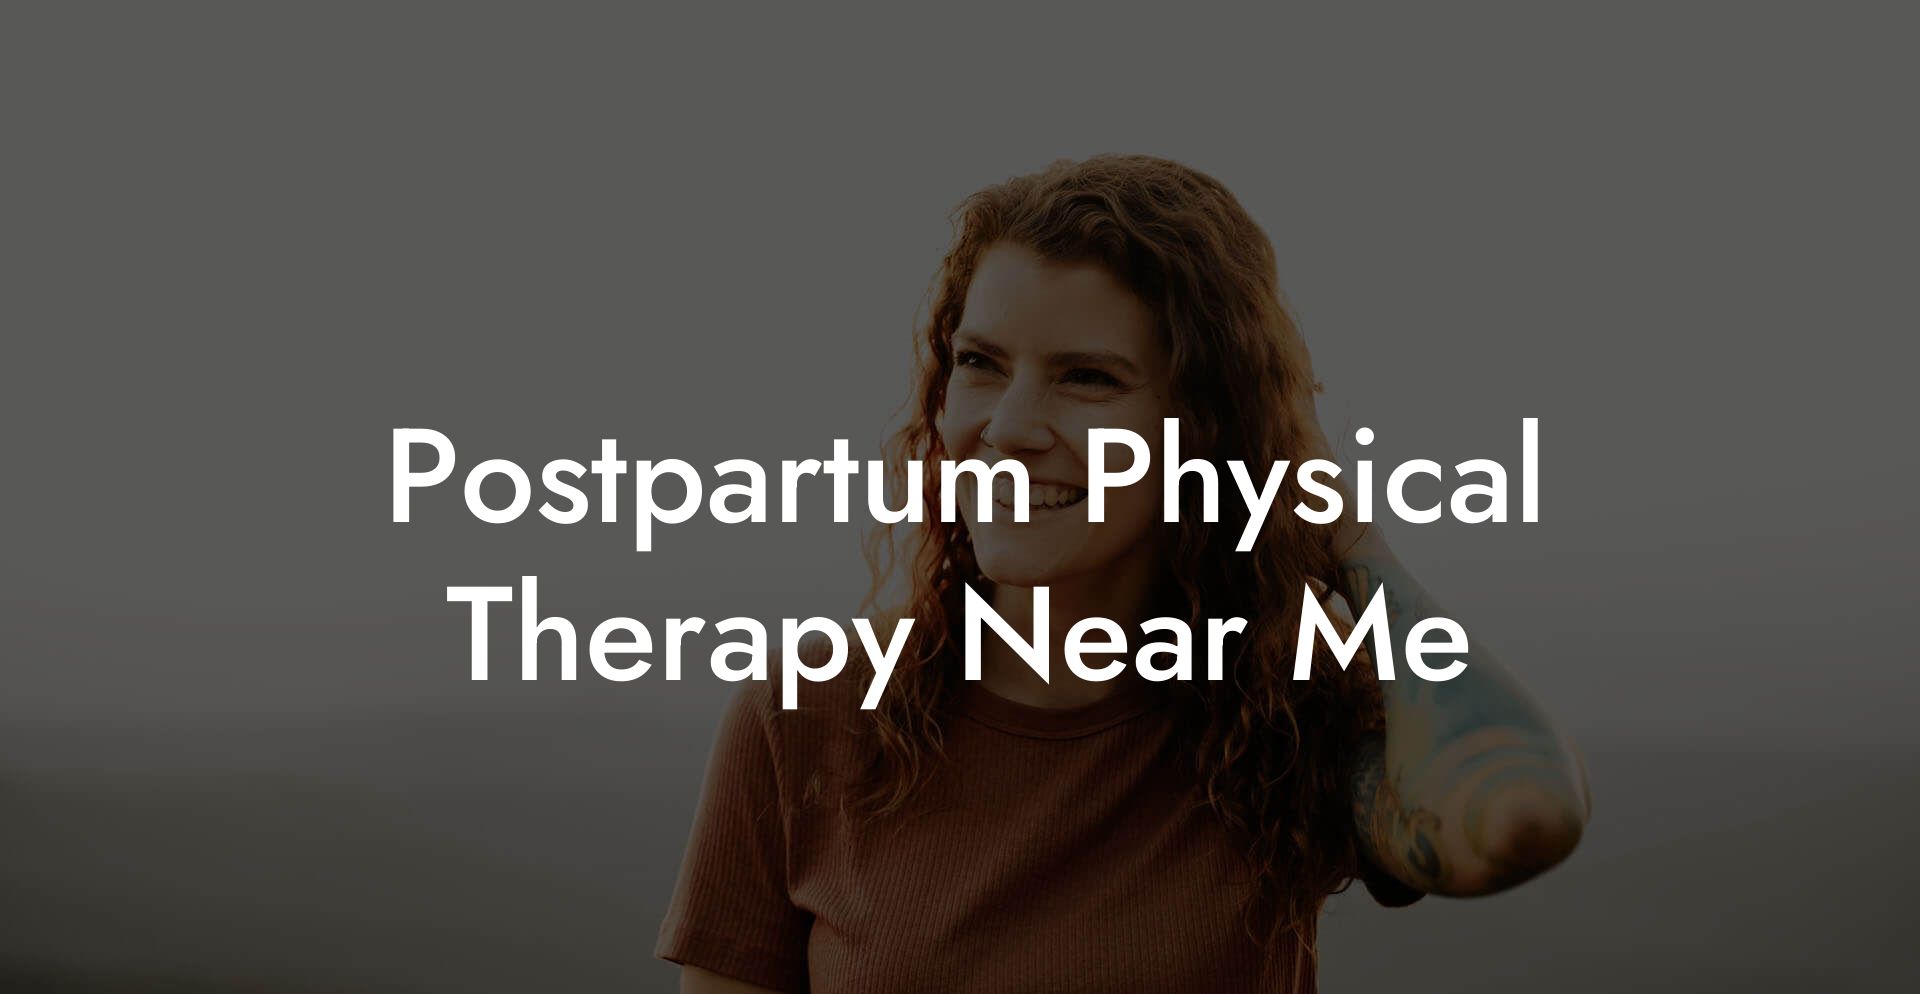 Postpartum Physical Therapy Near Me